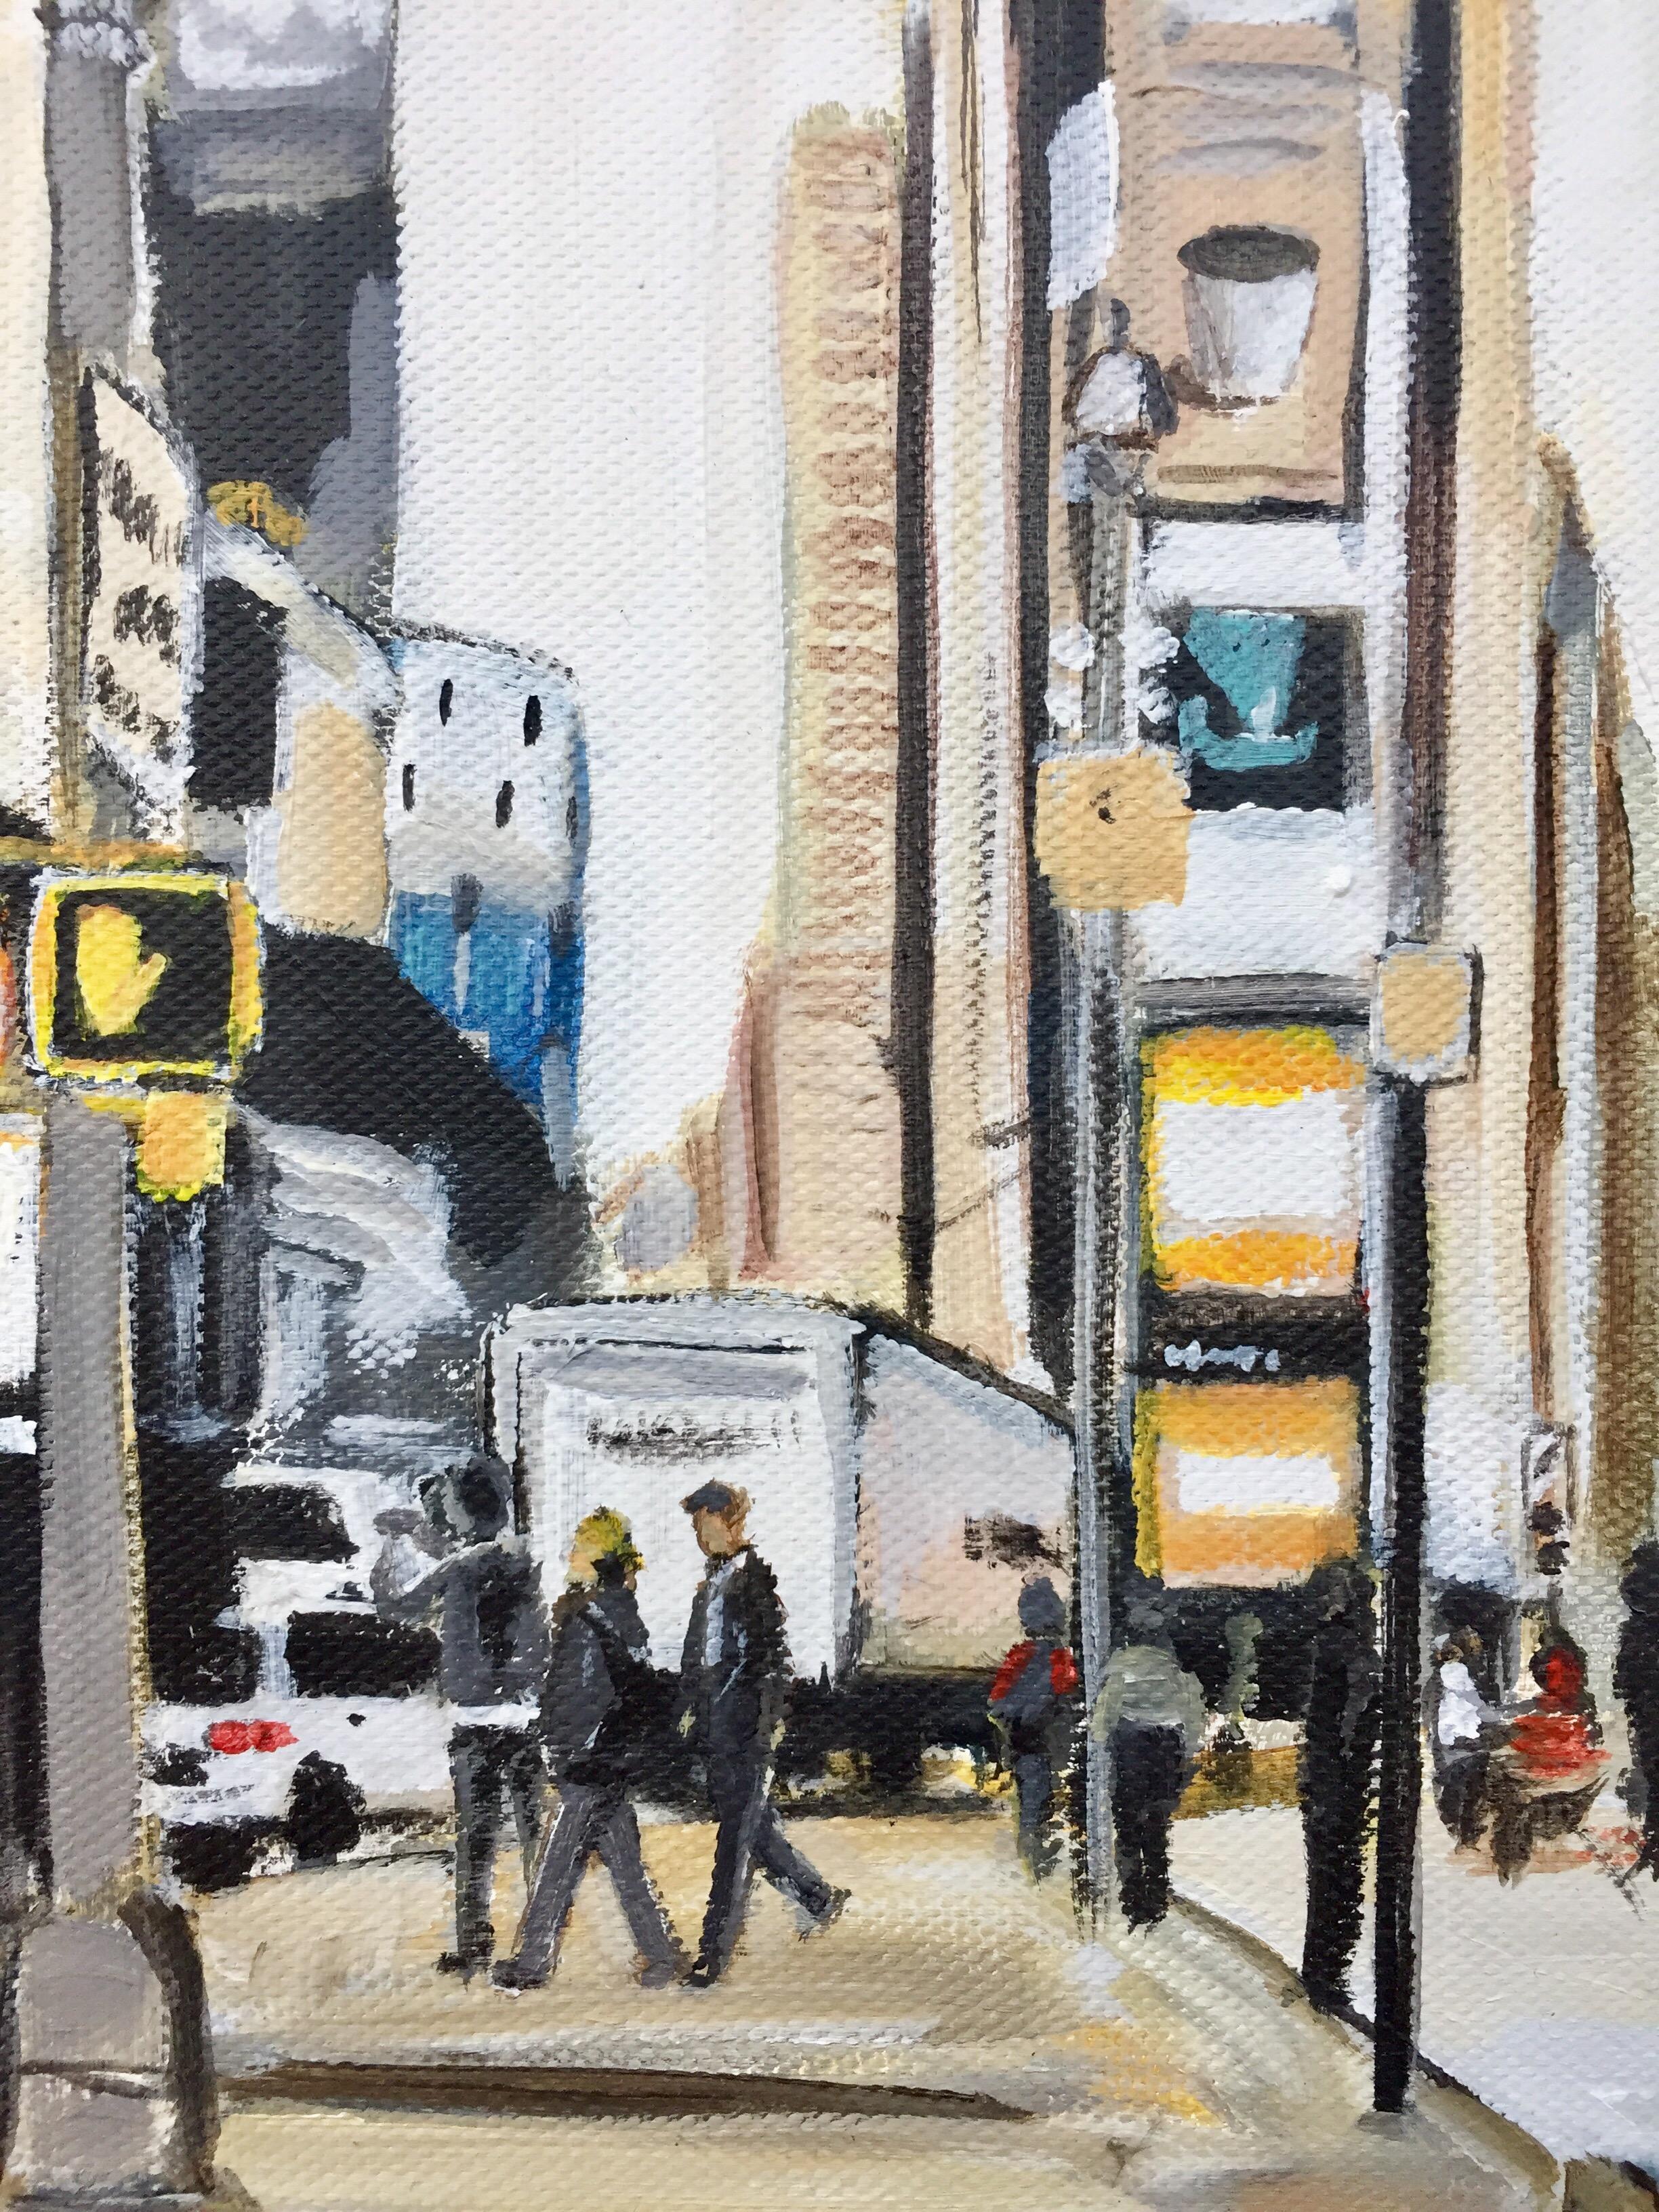 Times Square Broadway 7th Ave Midtown Manhattan New York City by British Artist 2